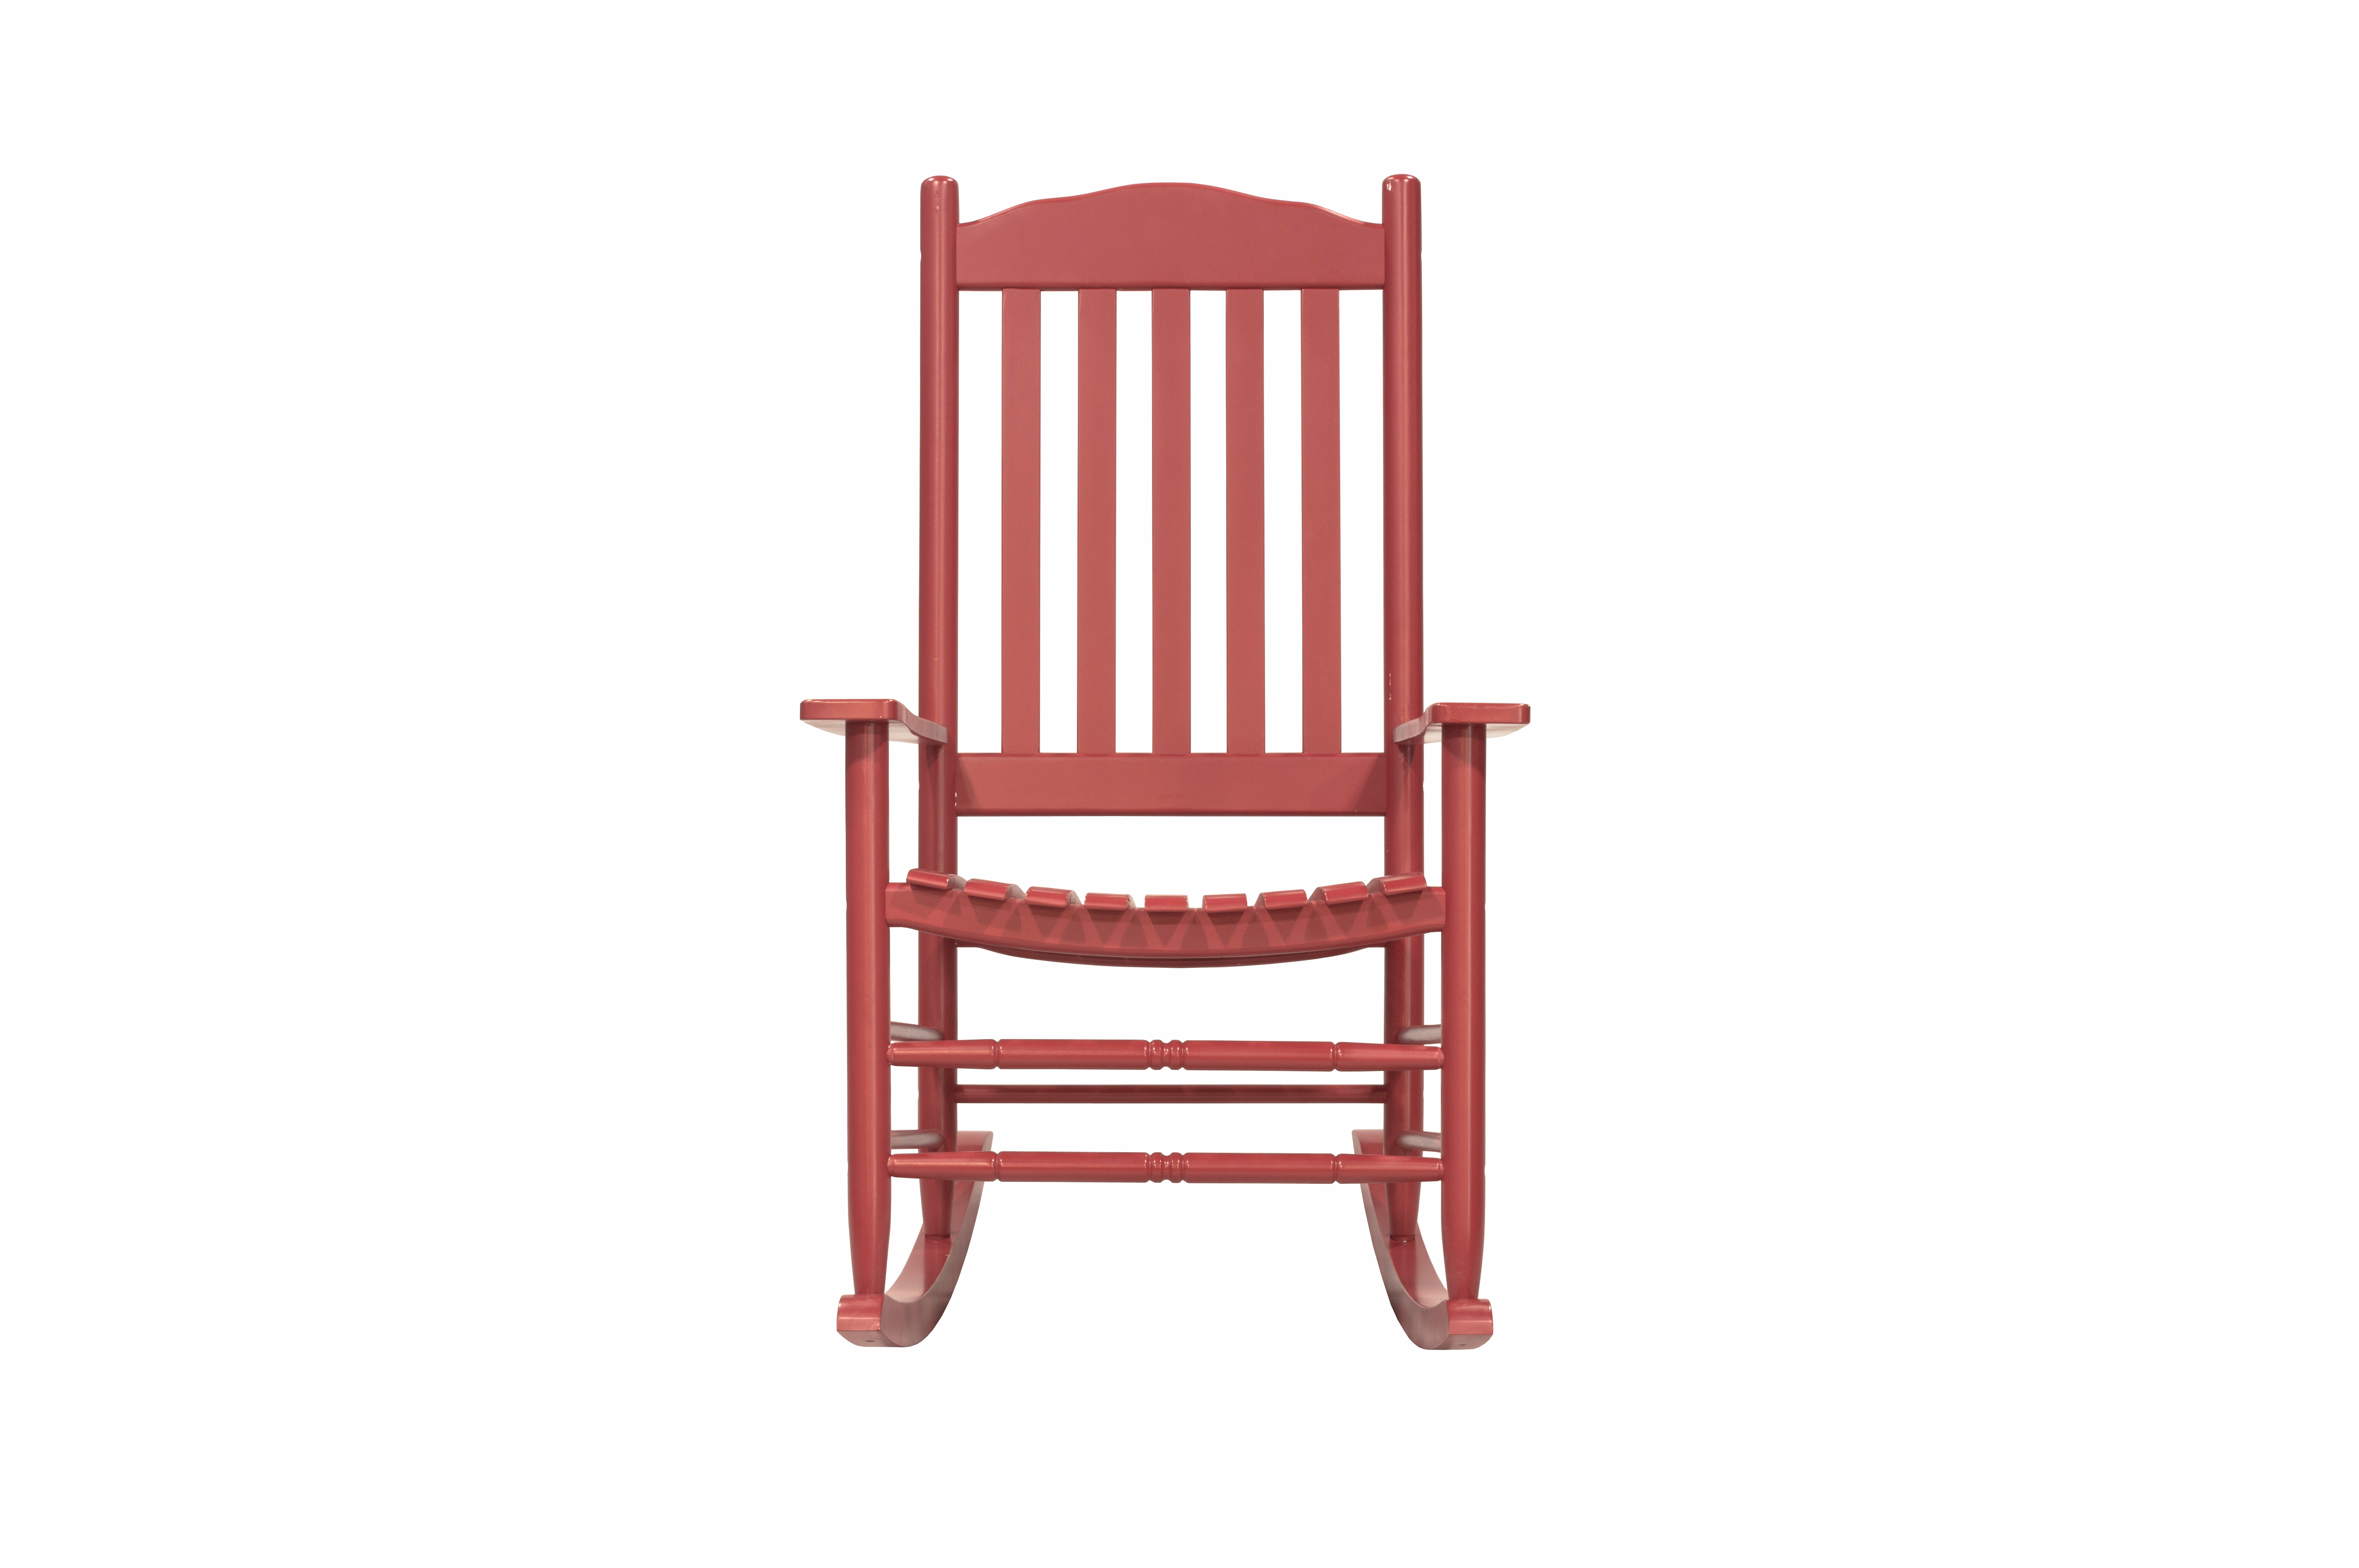 Outdoor Patio Garden Furniture 3-Piece Wood Porch Rocking Chair Set, Weather Resistant Finish,2 Rocking Chairs and 1 Side Table-Red - image 4 of 11